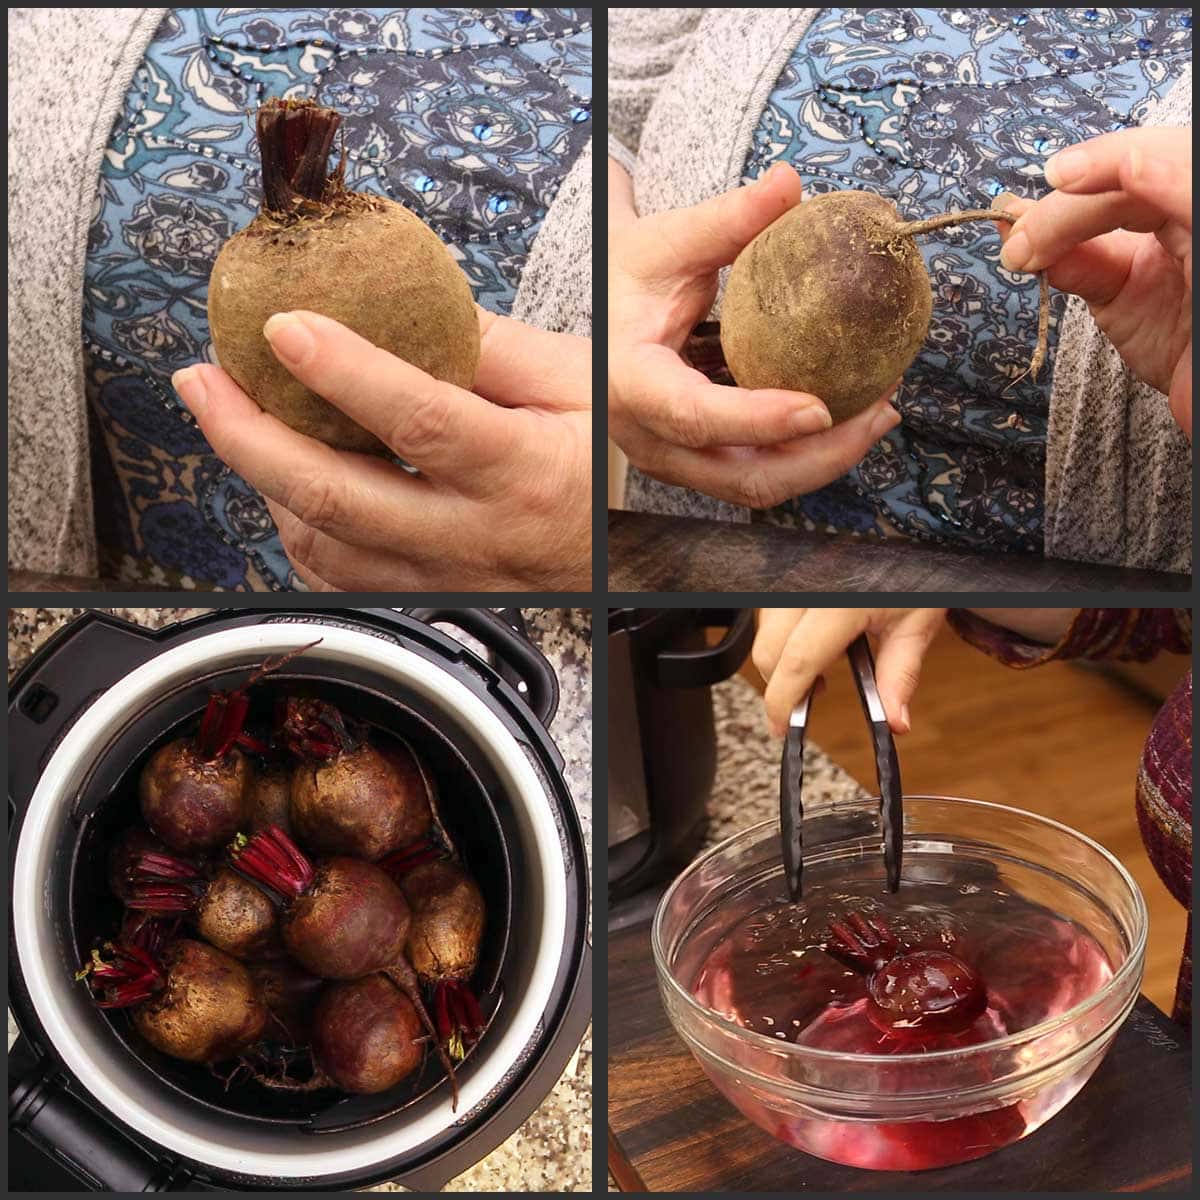 collage showing cooking the beets in a pressure cooker.